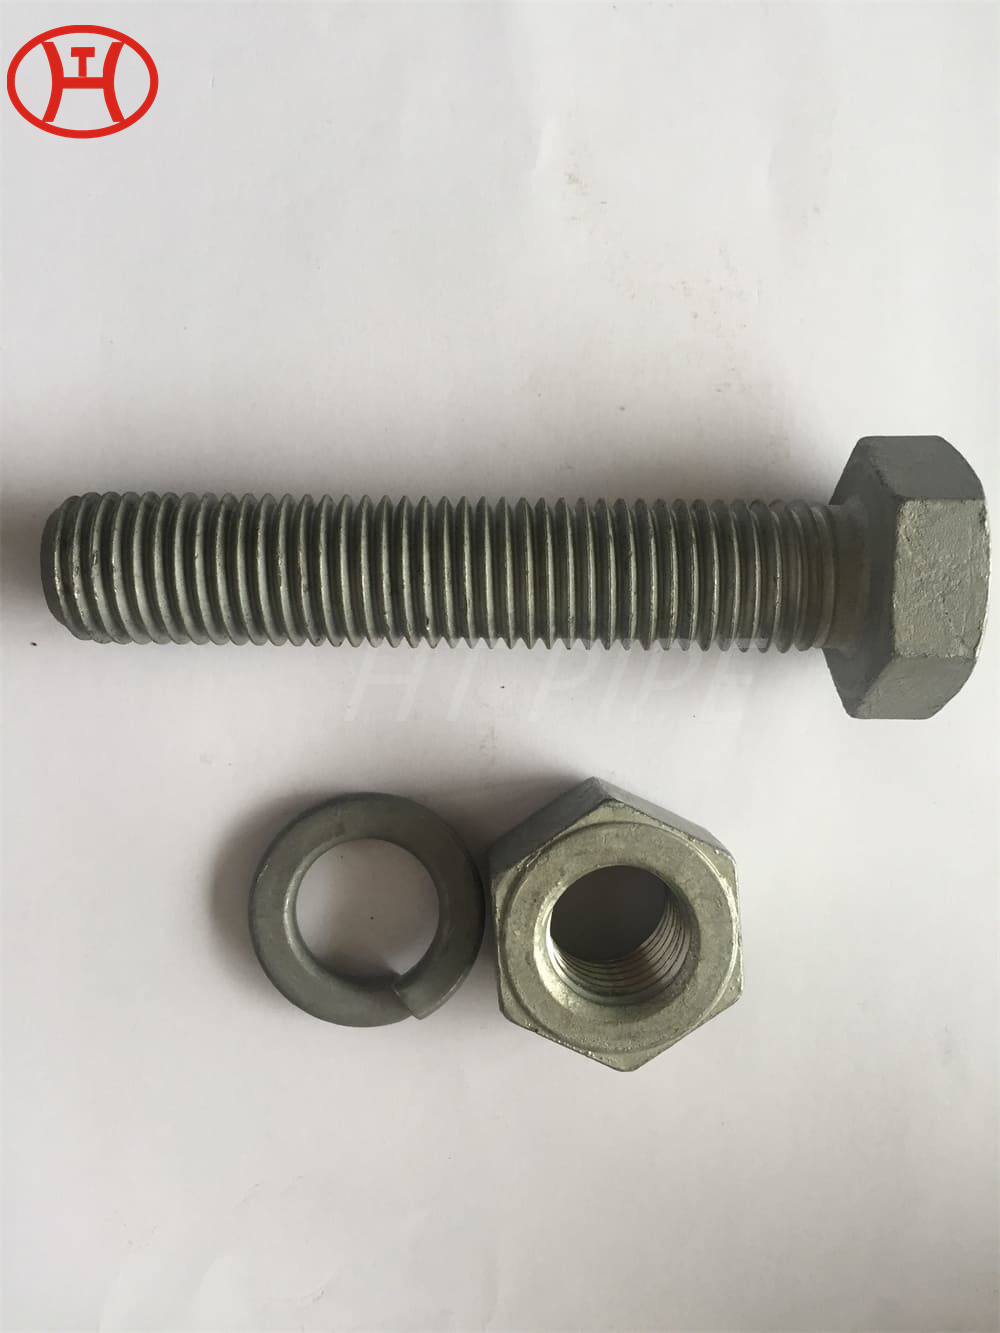 DIN933 UNS N08825-Incoloy 825 full thread Nature Nickel Alloy flat head hex bolt 3-8 hex bolt Incoloy 825 hex bolt